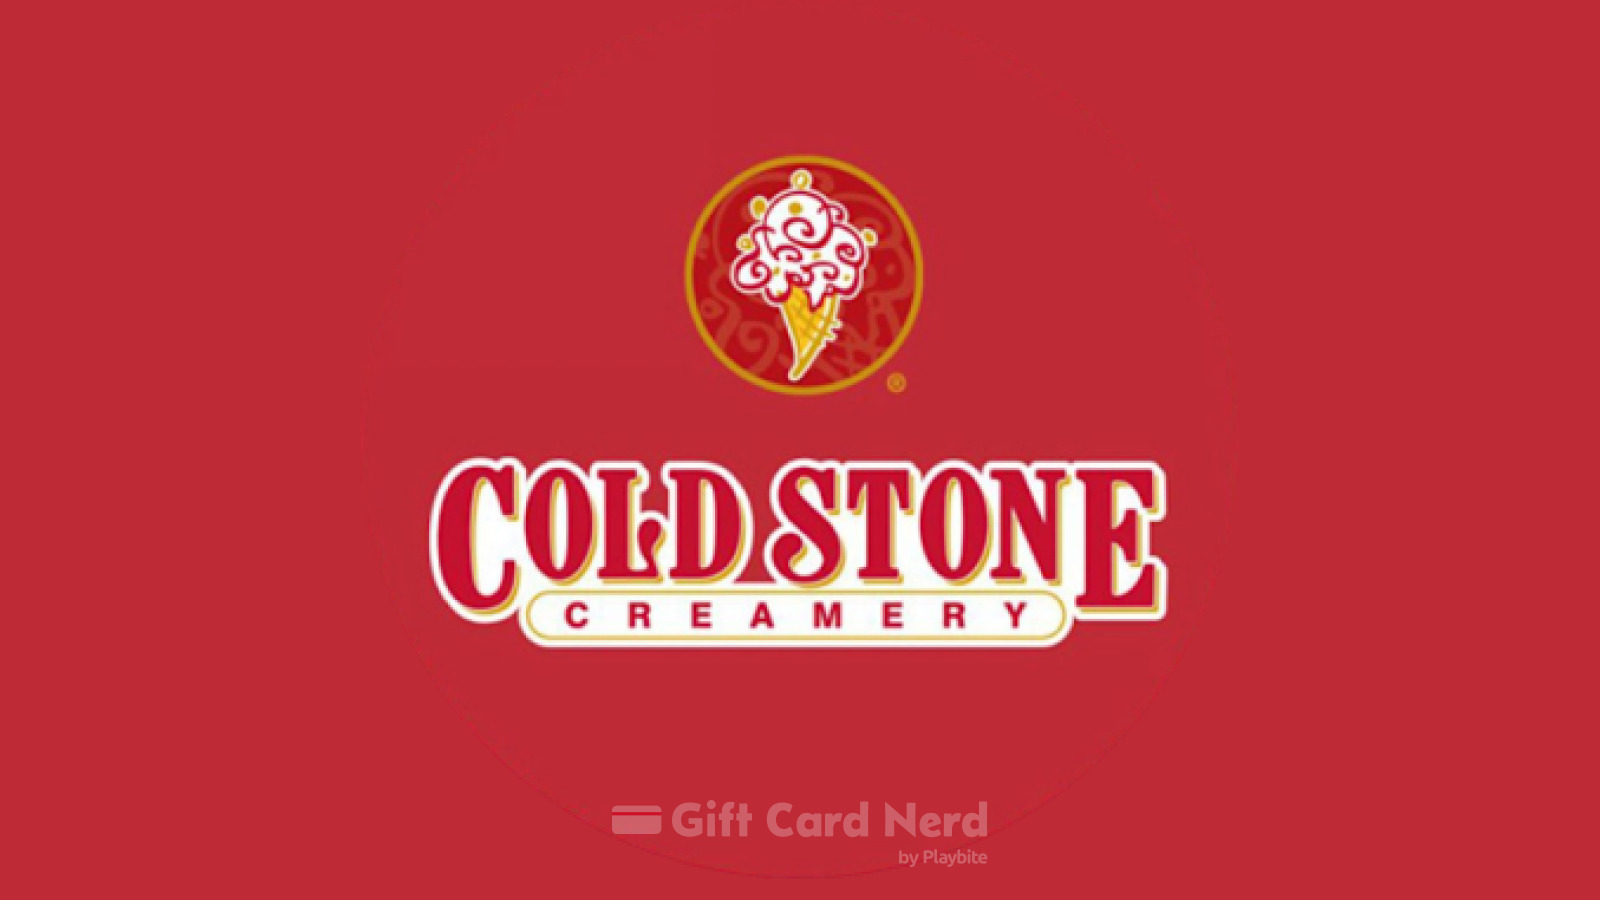 Does Target Sell Cold Stone Creamery Gift Cards?